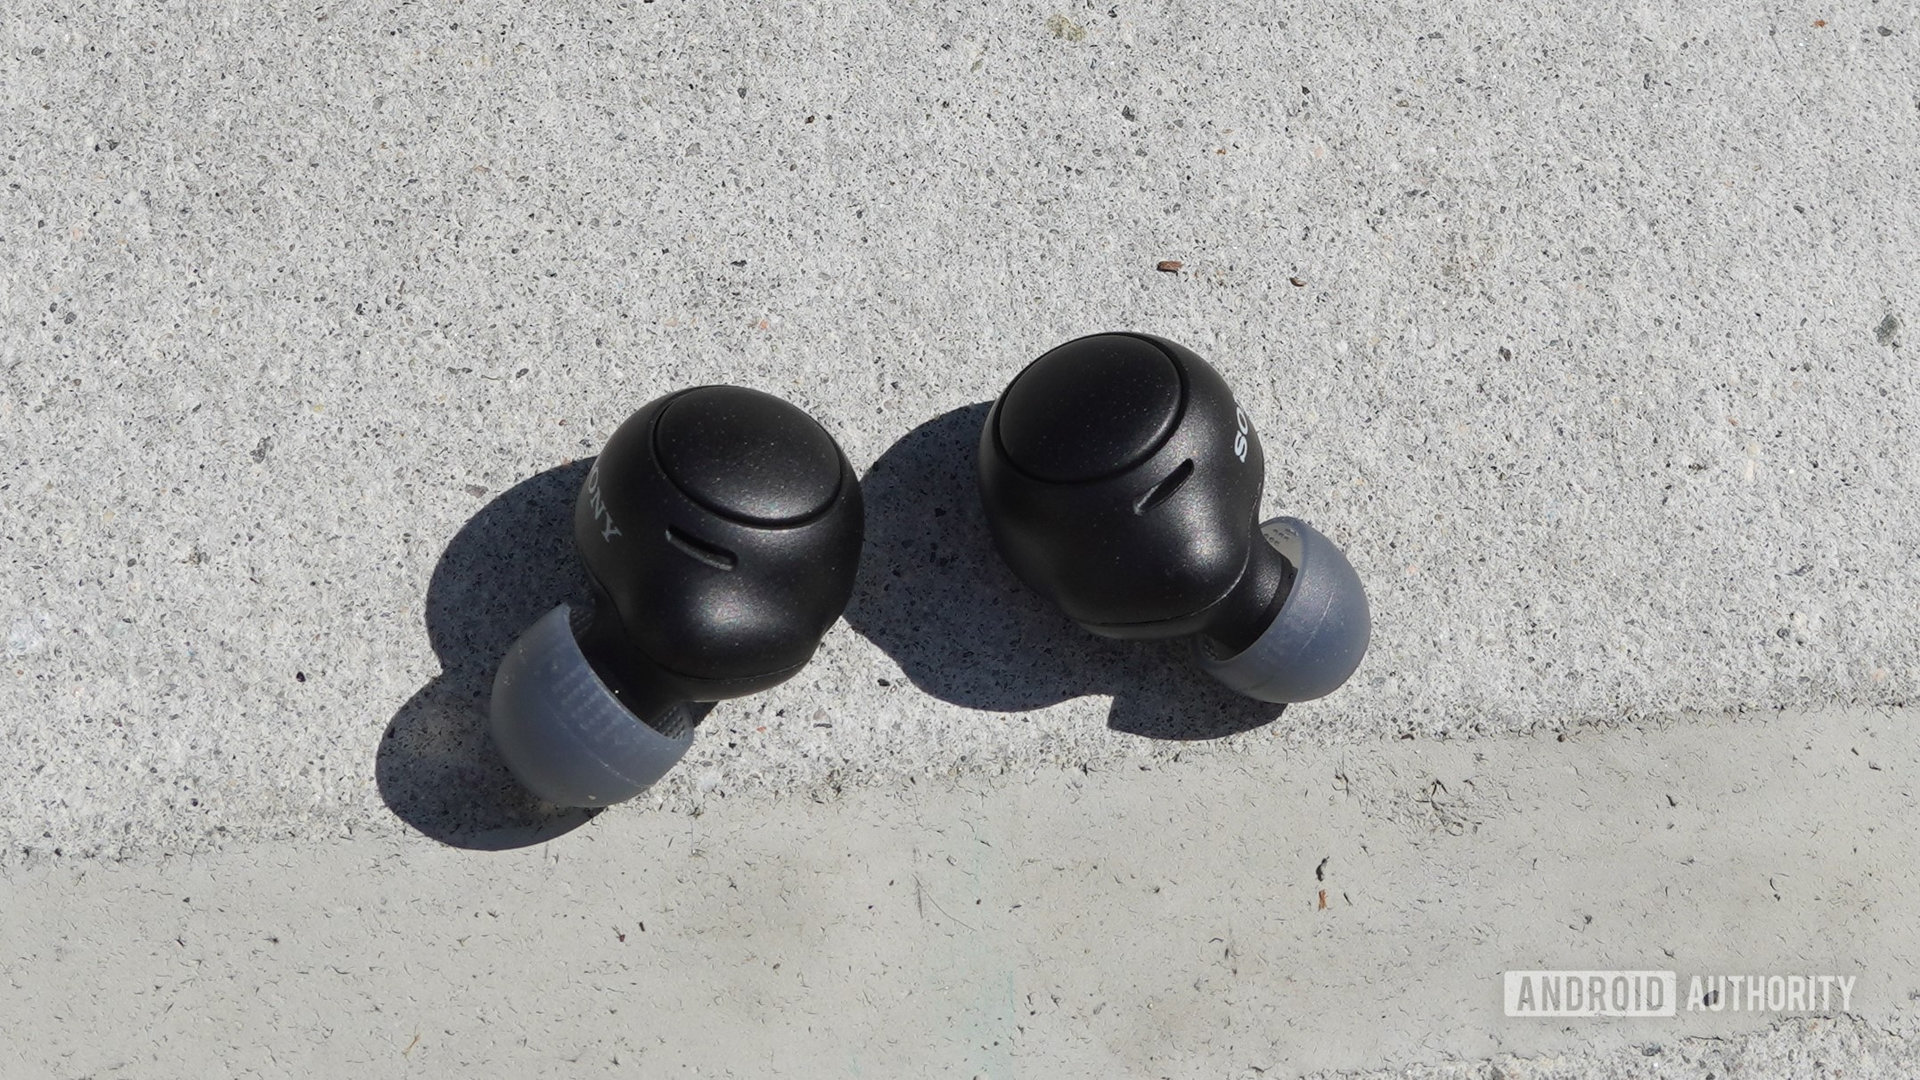 The Sony WF-C500 earbuds lying outside on concrete.